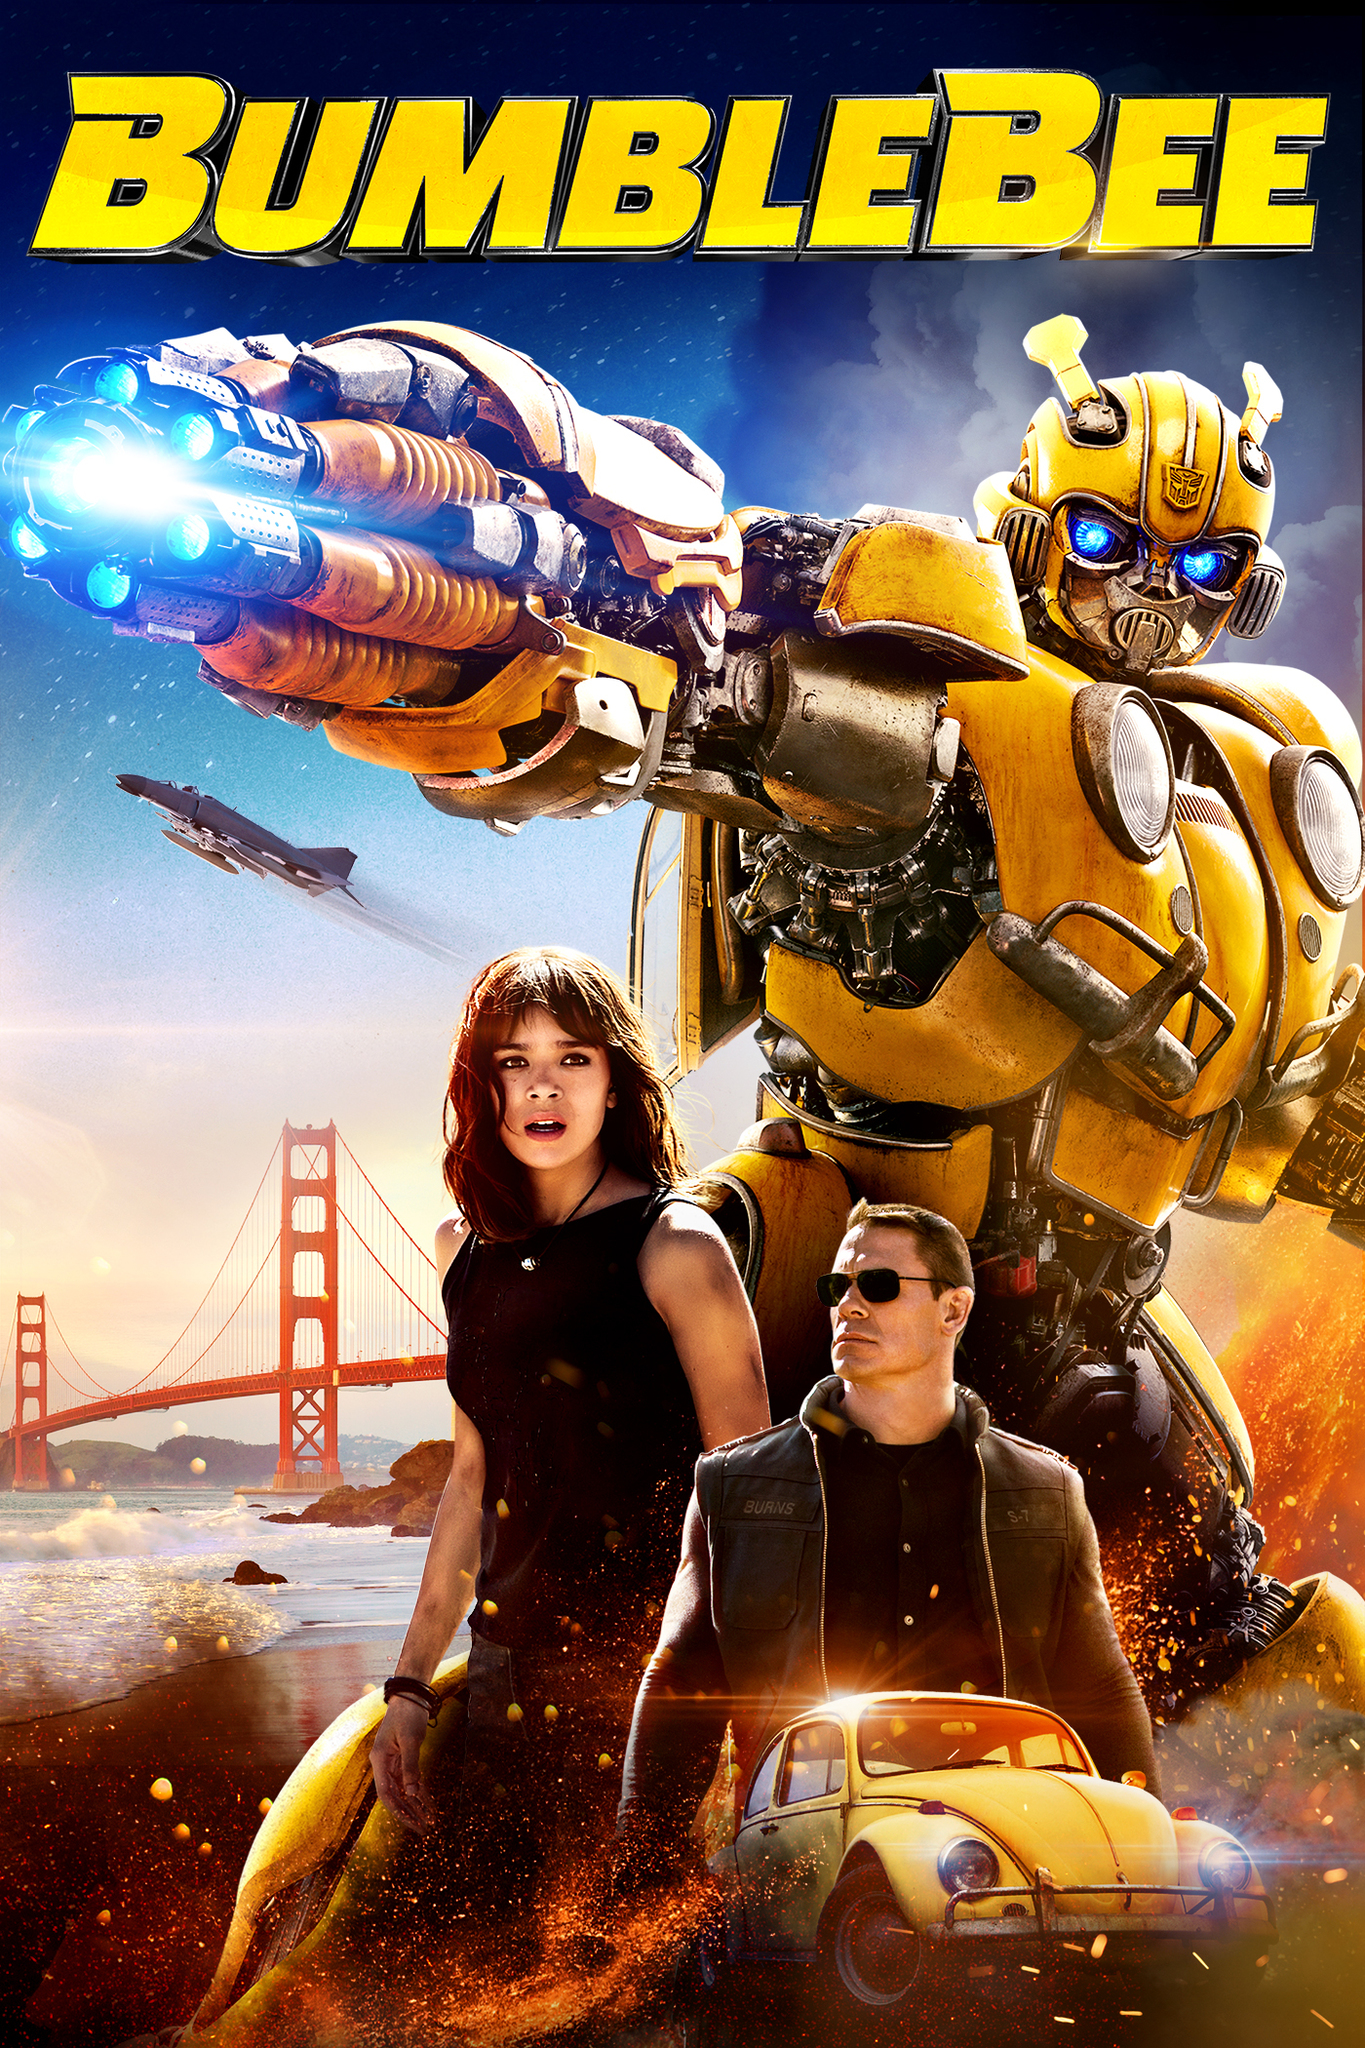 poster of a movie featuring a Transformer-like character.